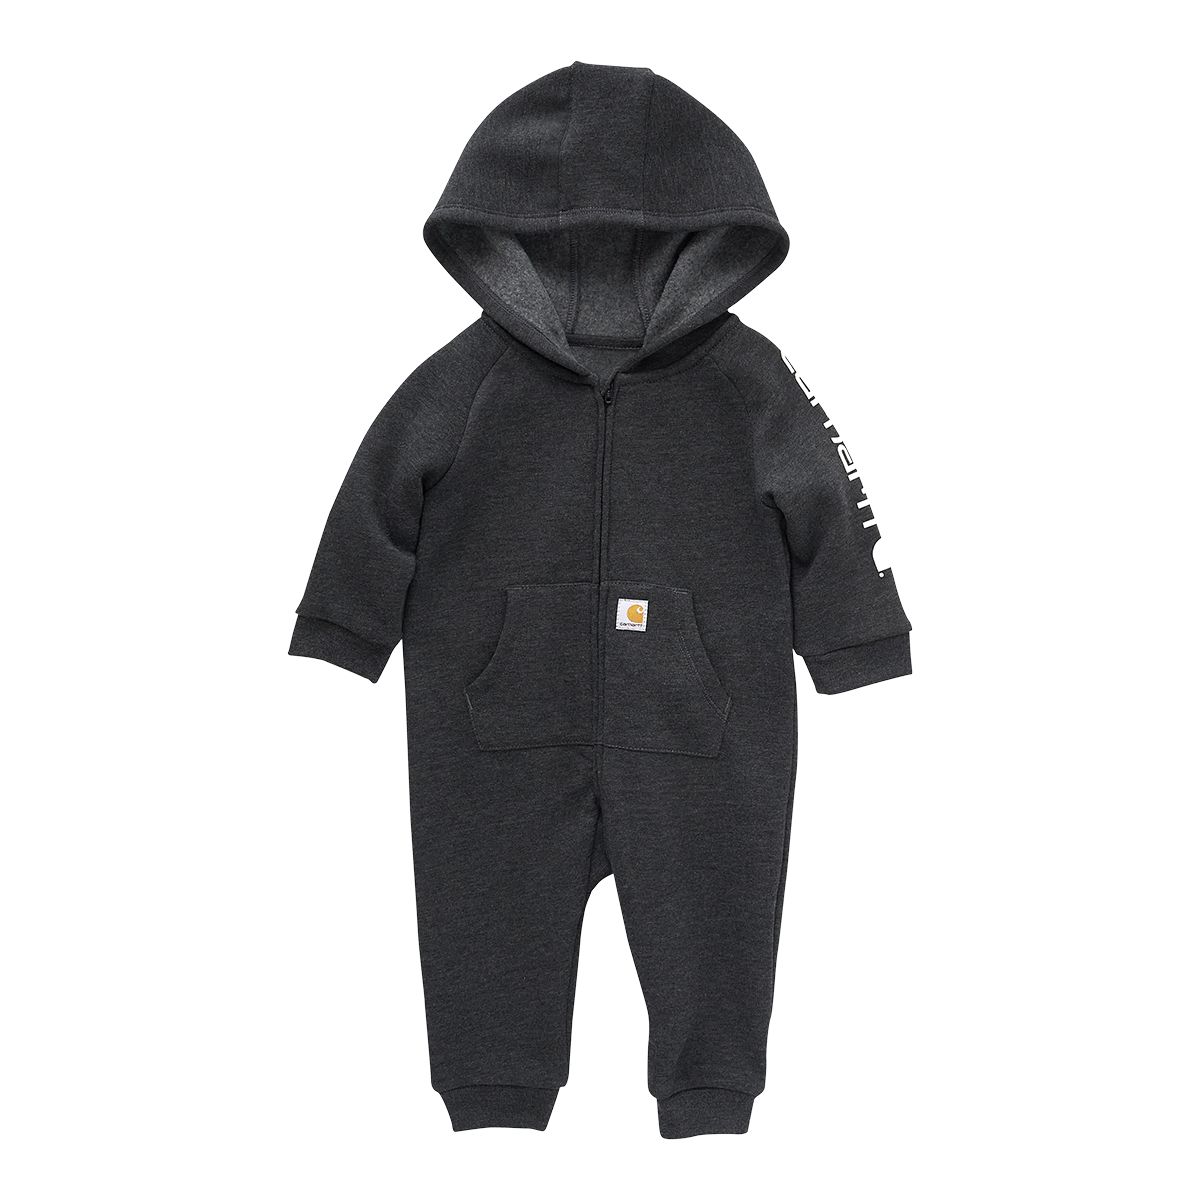 Image of Carhartt Infant Boys' Zip Coverall